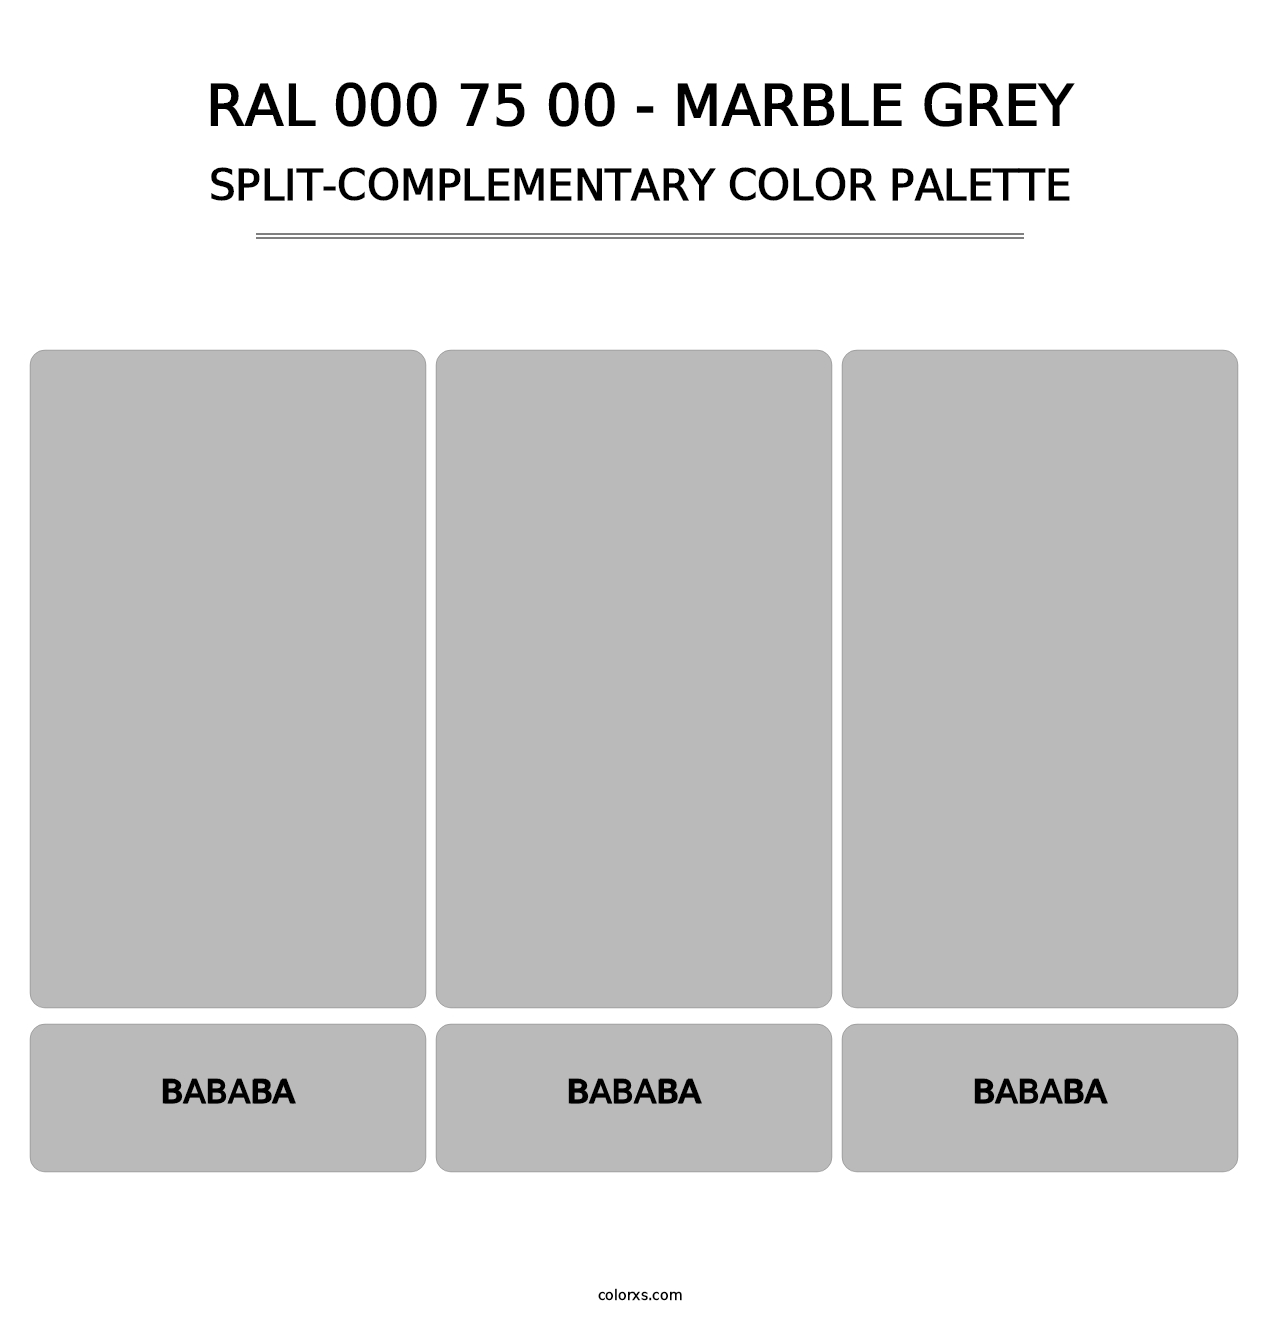 RAL 000 75 00 - Marble Grey - Split-Complementary Color Palette